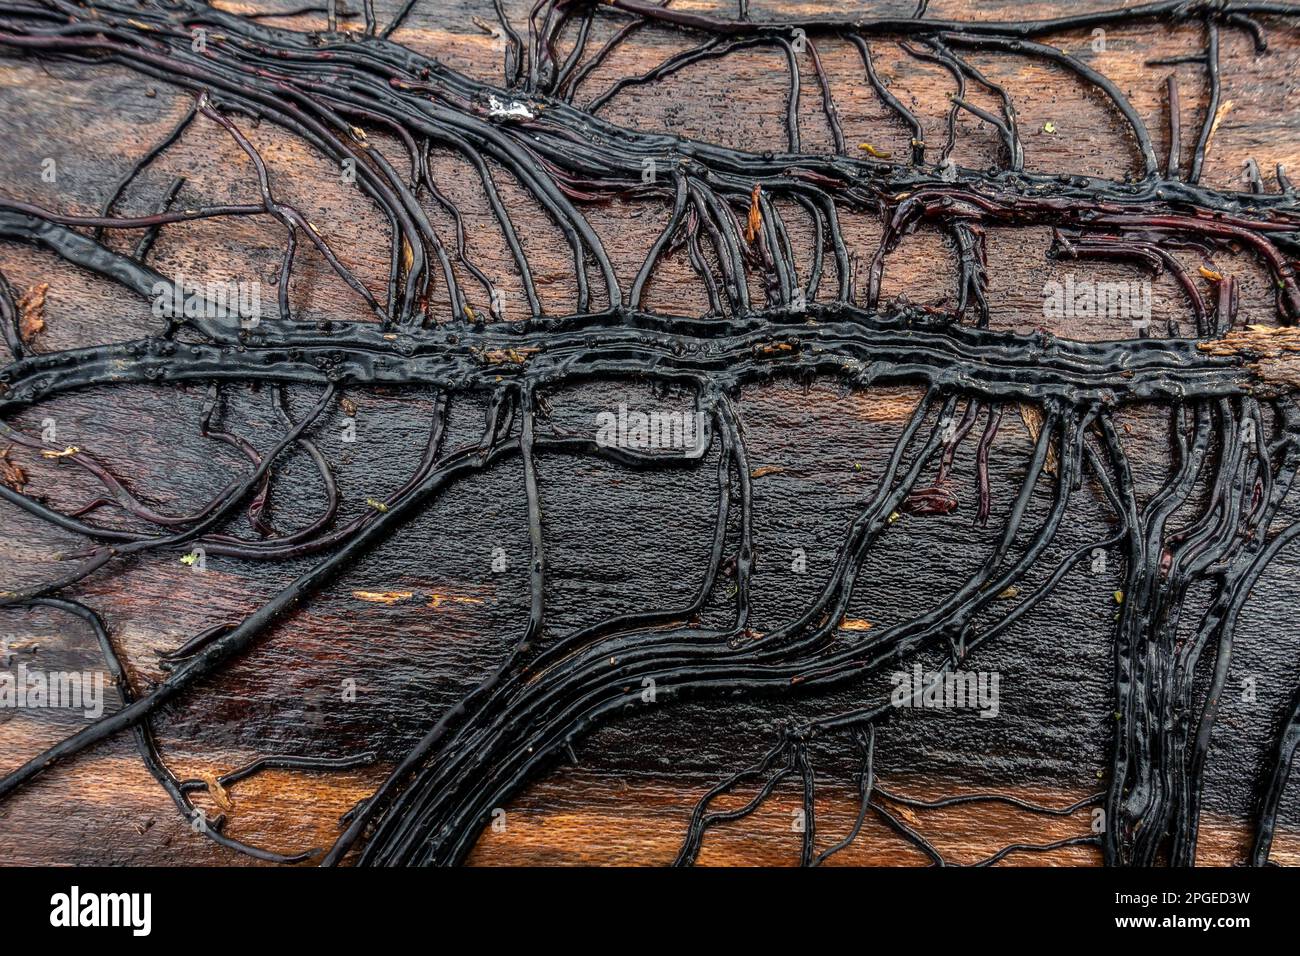 Root network from ivy beneath the bark of a fallen tree, Yorkshire, UK Stock Photo